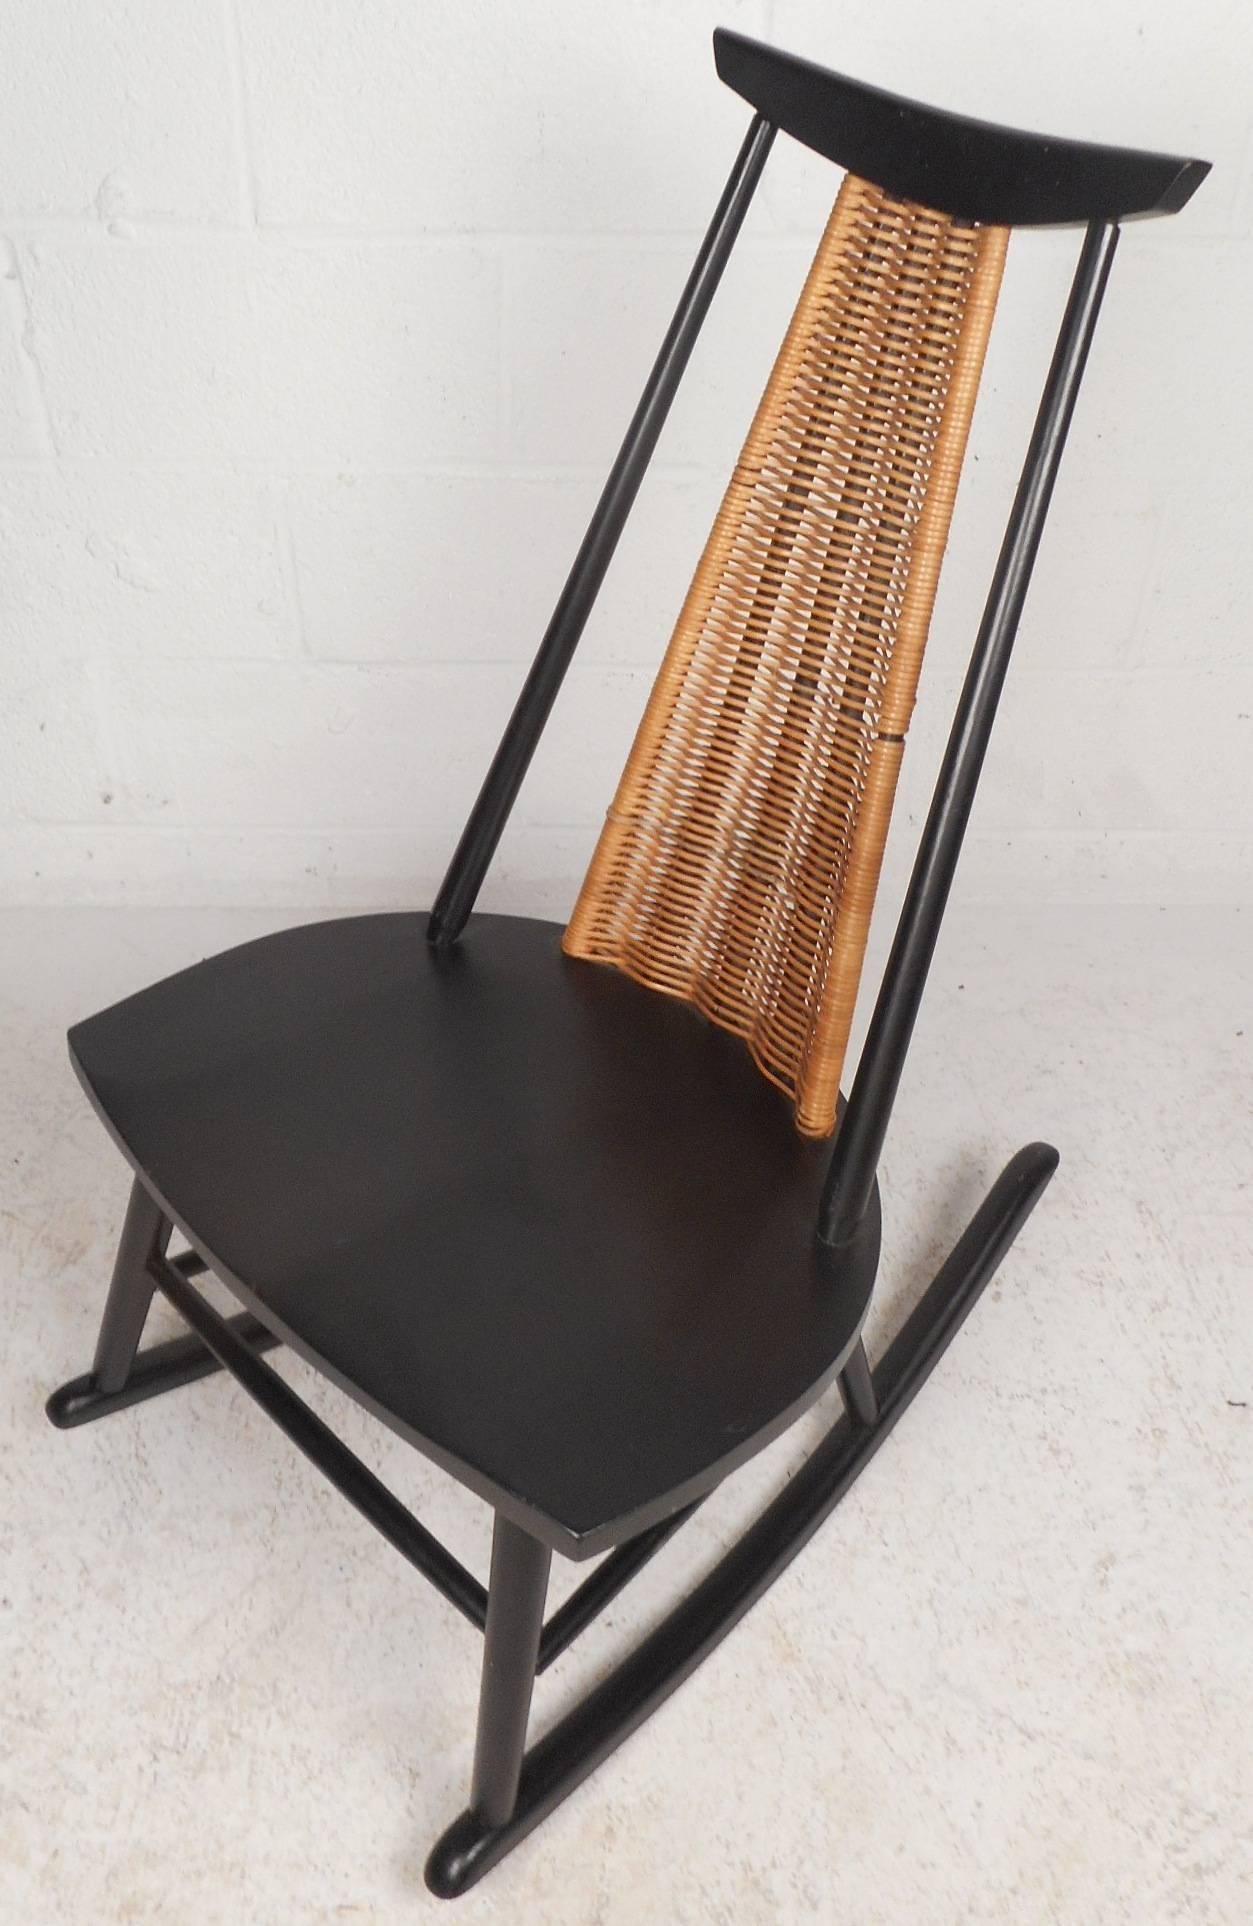 This gorgeous vintage modern rocking chair features an ebonized finish and a unique woven backrest. Sleek design with perfectly contoured seating for optimal comfort and a trapezoid backrest with spindle sides. The sculpted head rest and angled feet